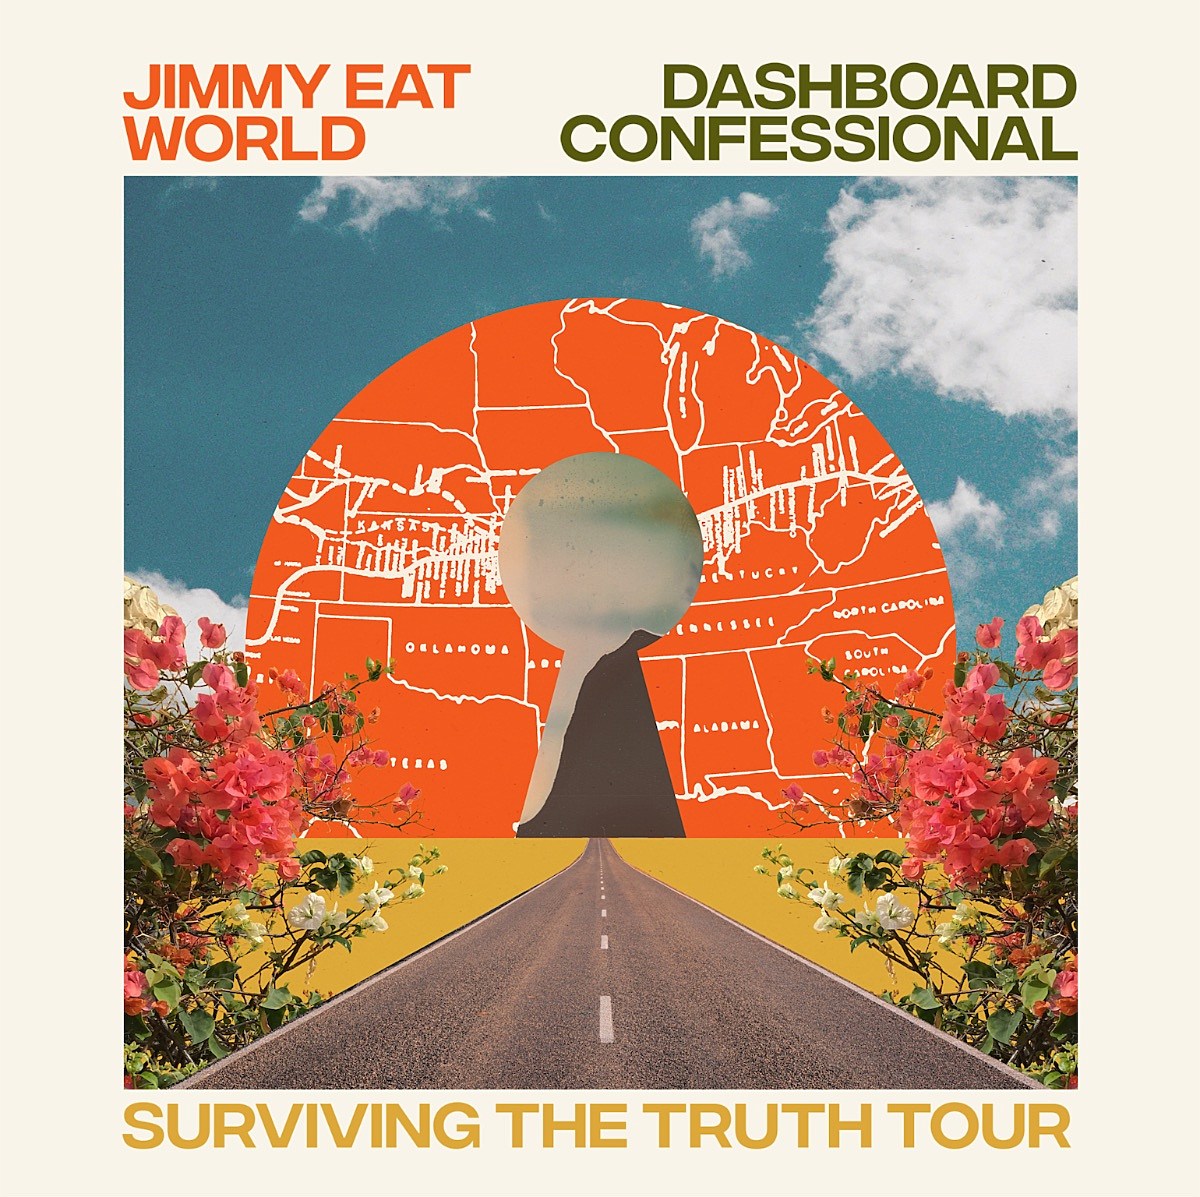 Jimmy Eat World & Dashboard Confessional announce “Surviving the Truth” tour